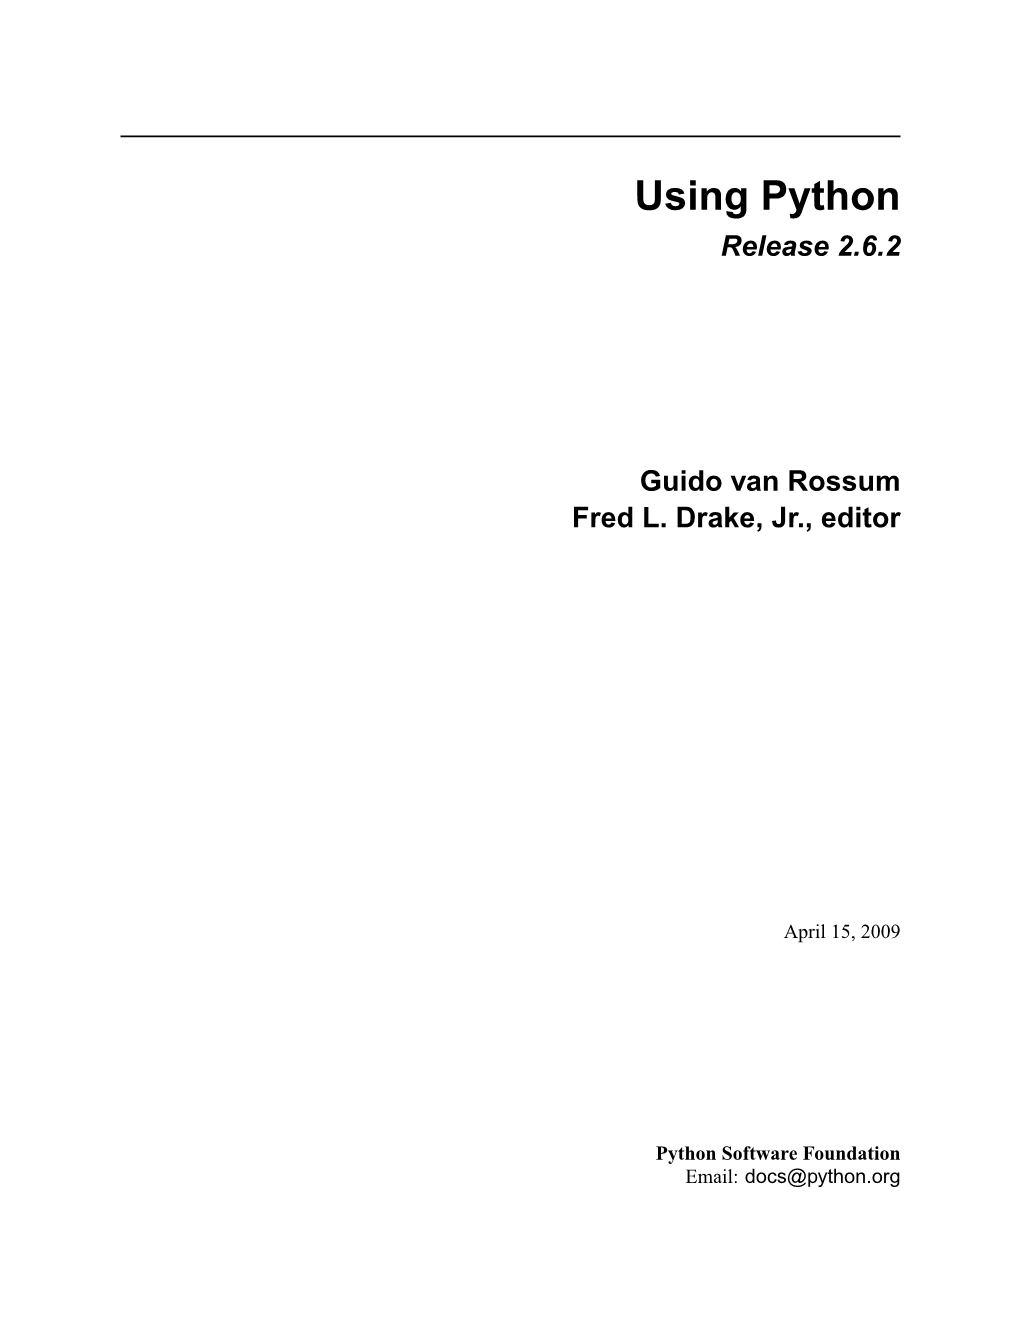 Using Python Release 2.6.2